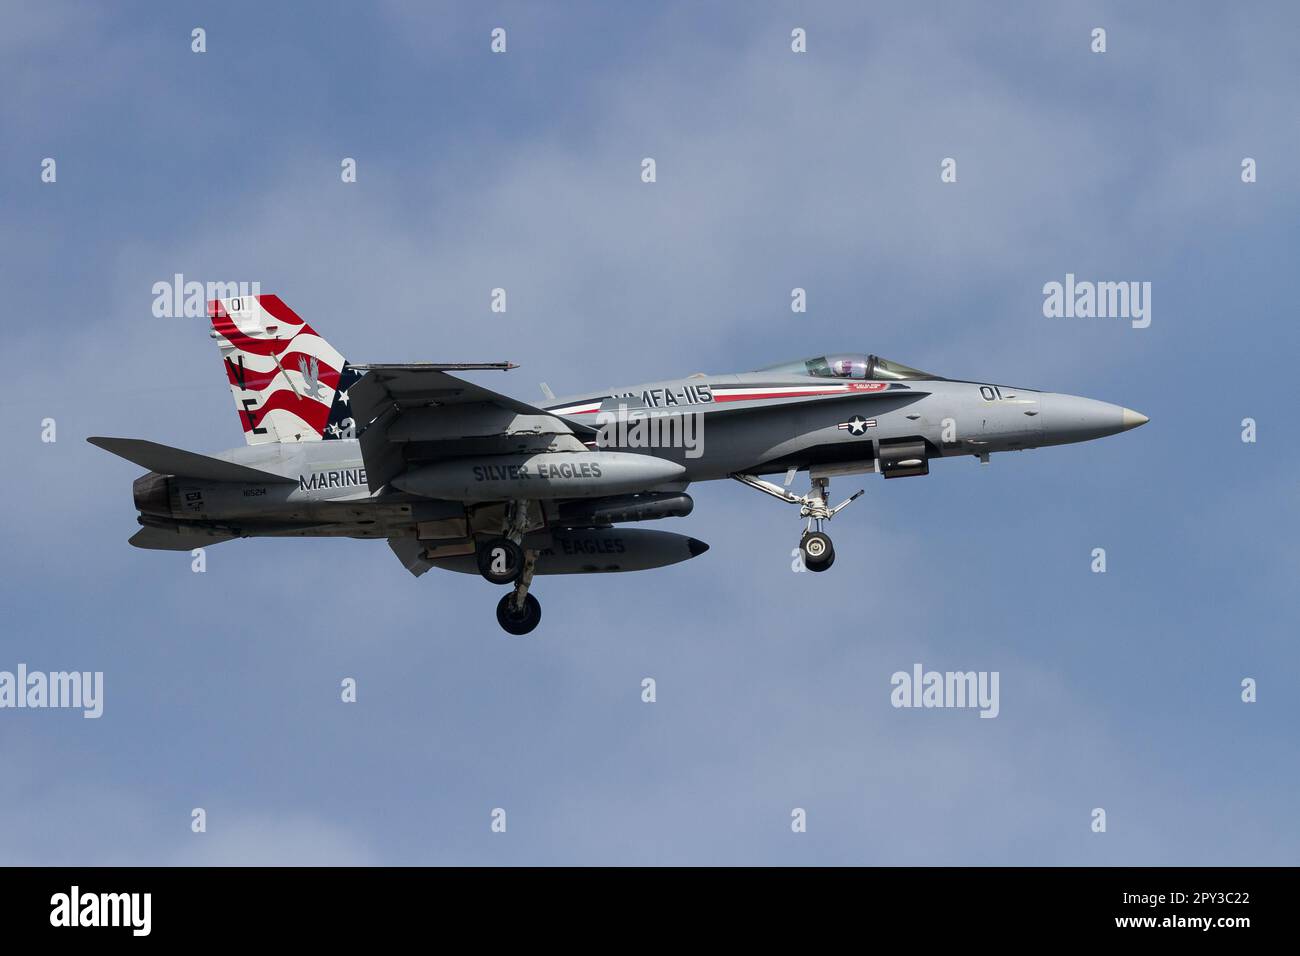 US Marines Corps McDonnell Douglas F/A-18C Legacy Hornet with the Marine Fighter Attack Squadron 115 (VMFA-115) known as the "Silver Eagles" Stock Photo